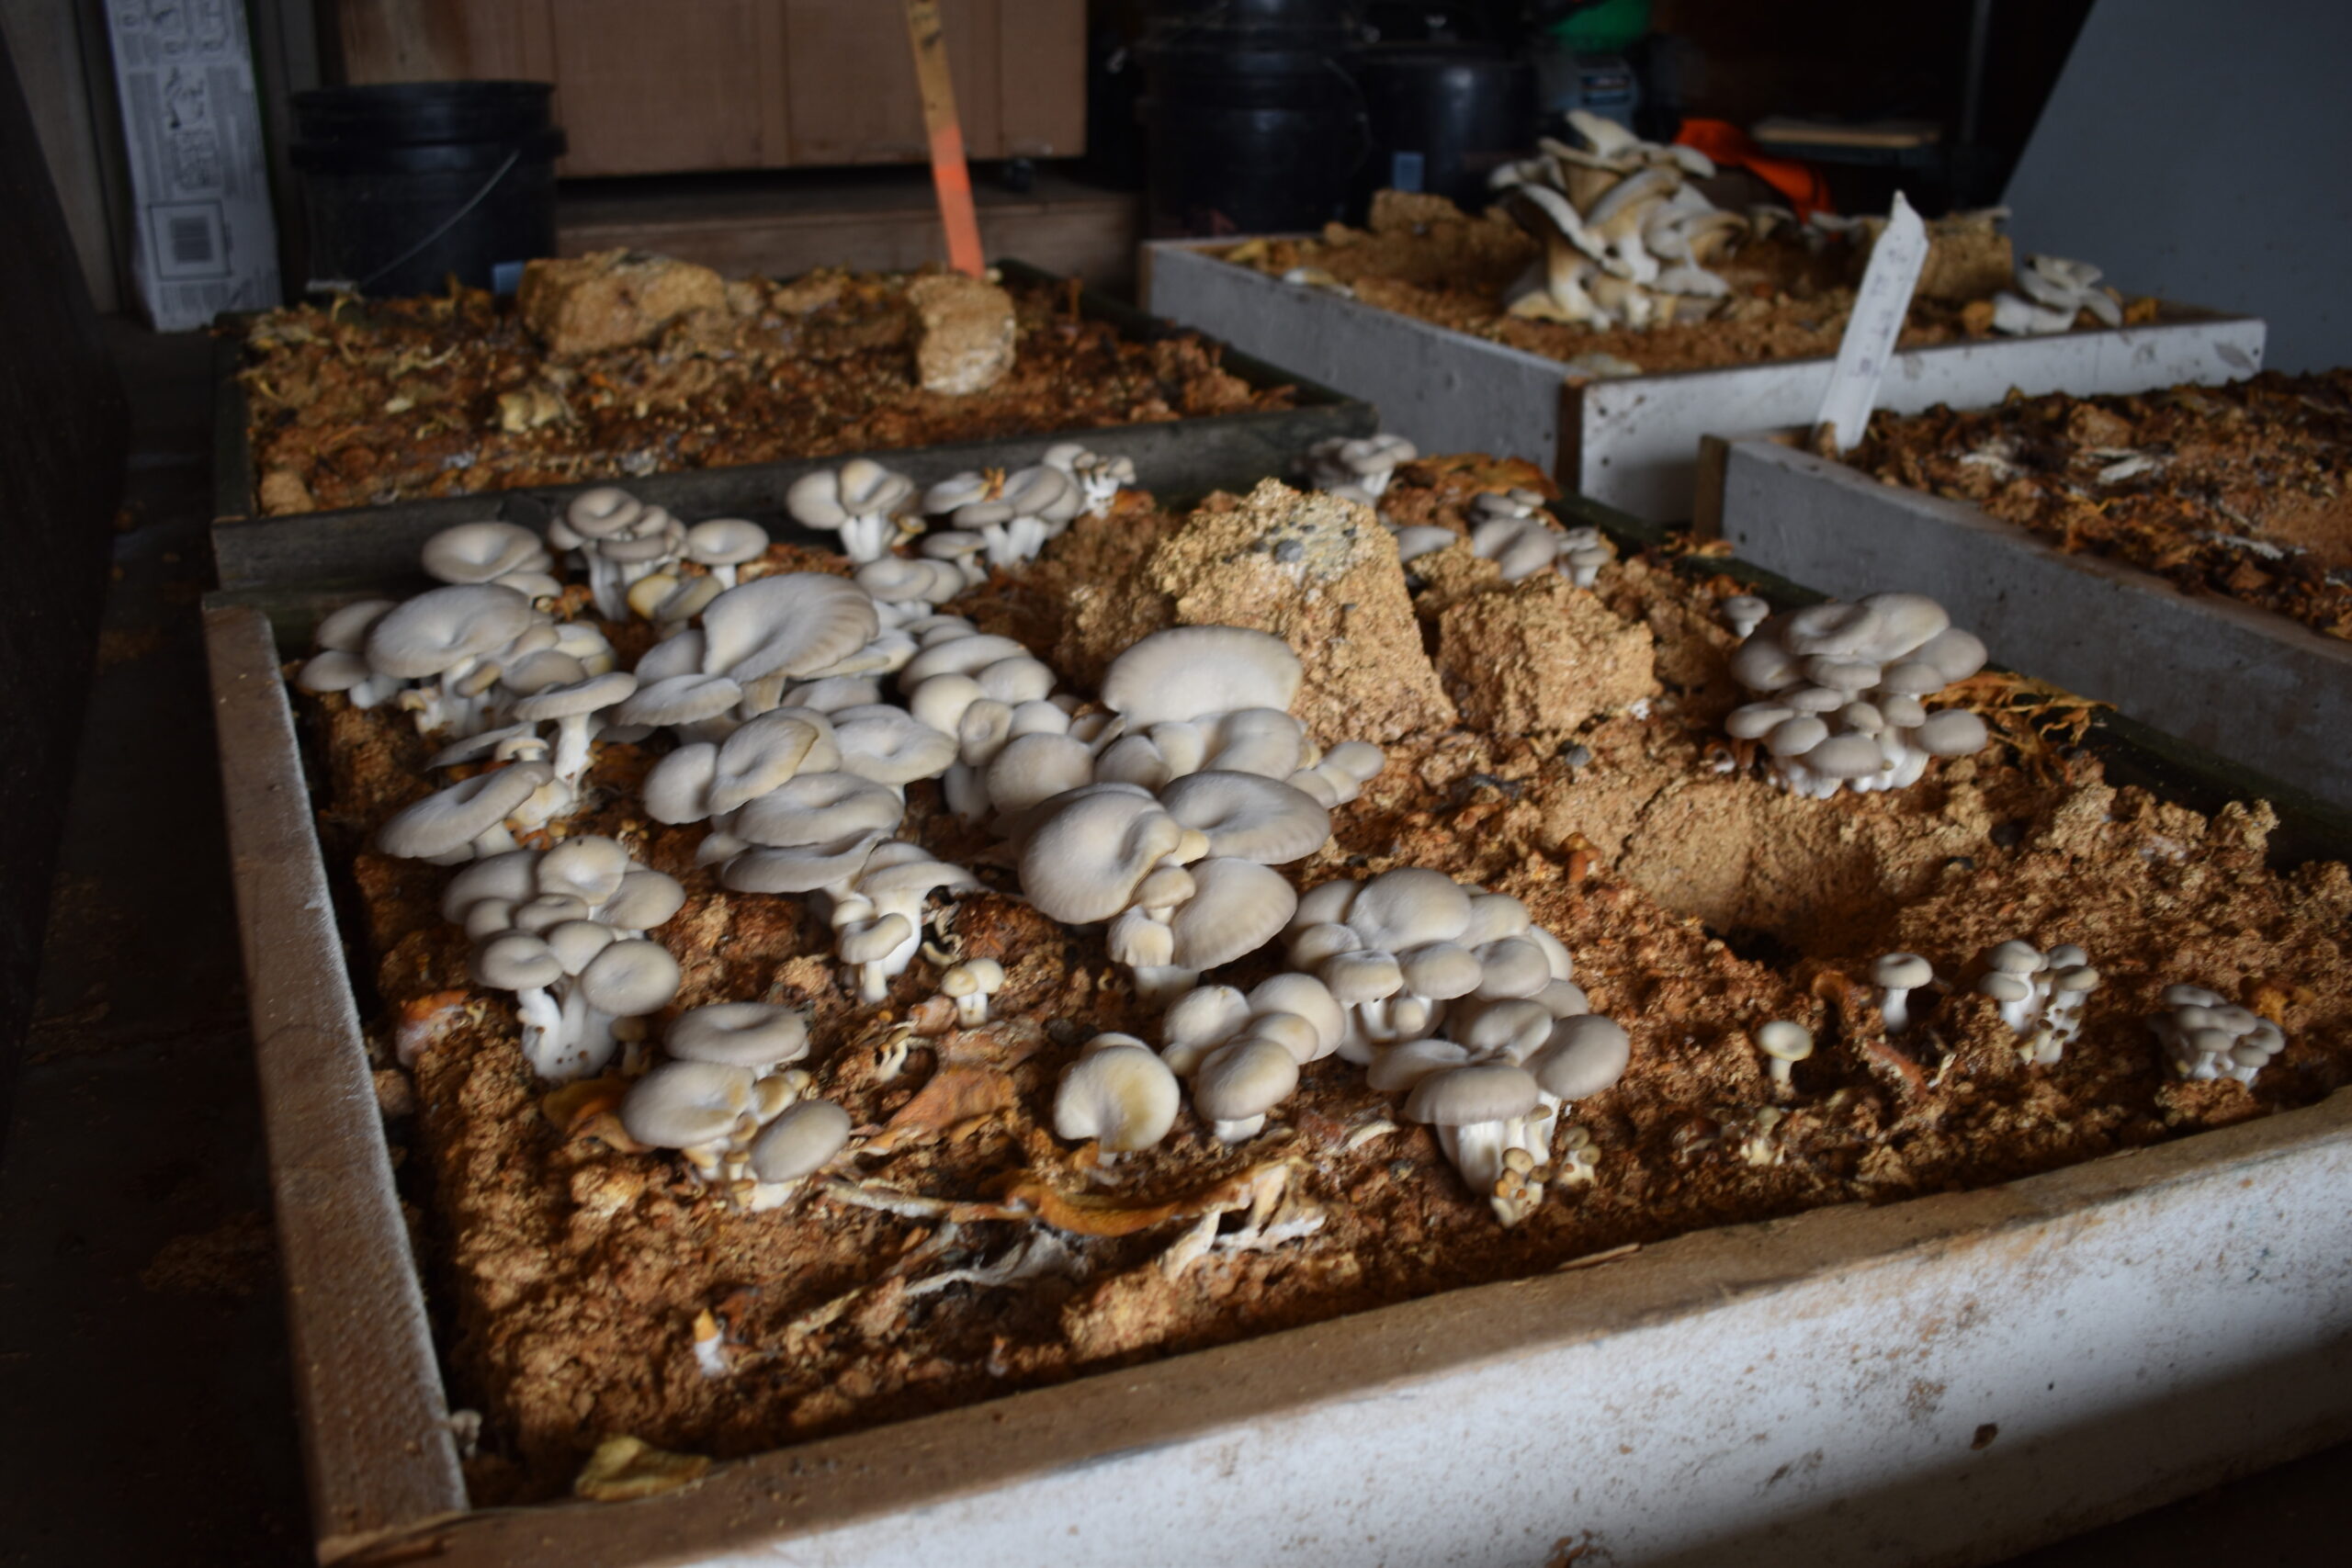 Mushrooms grow in a garage at the Marathon County landfill as part of an experiment in environmental cleanup.